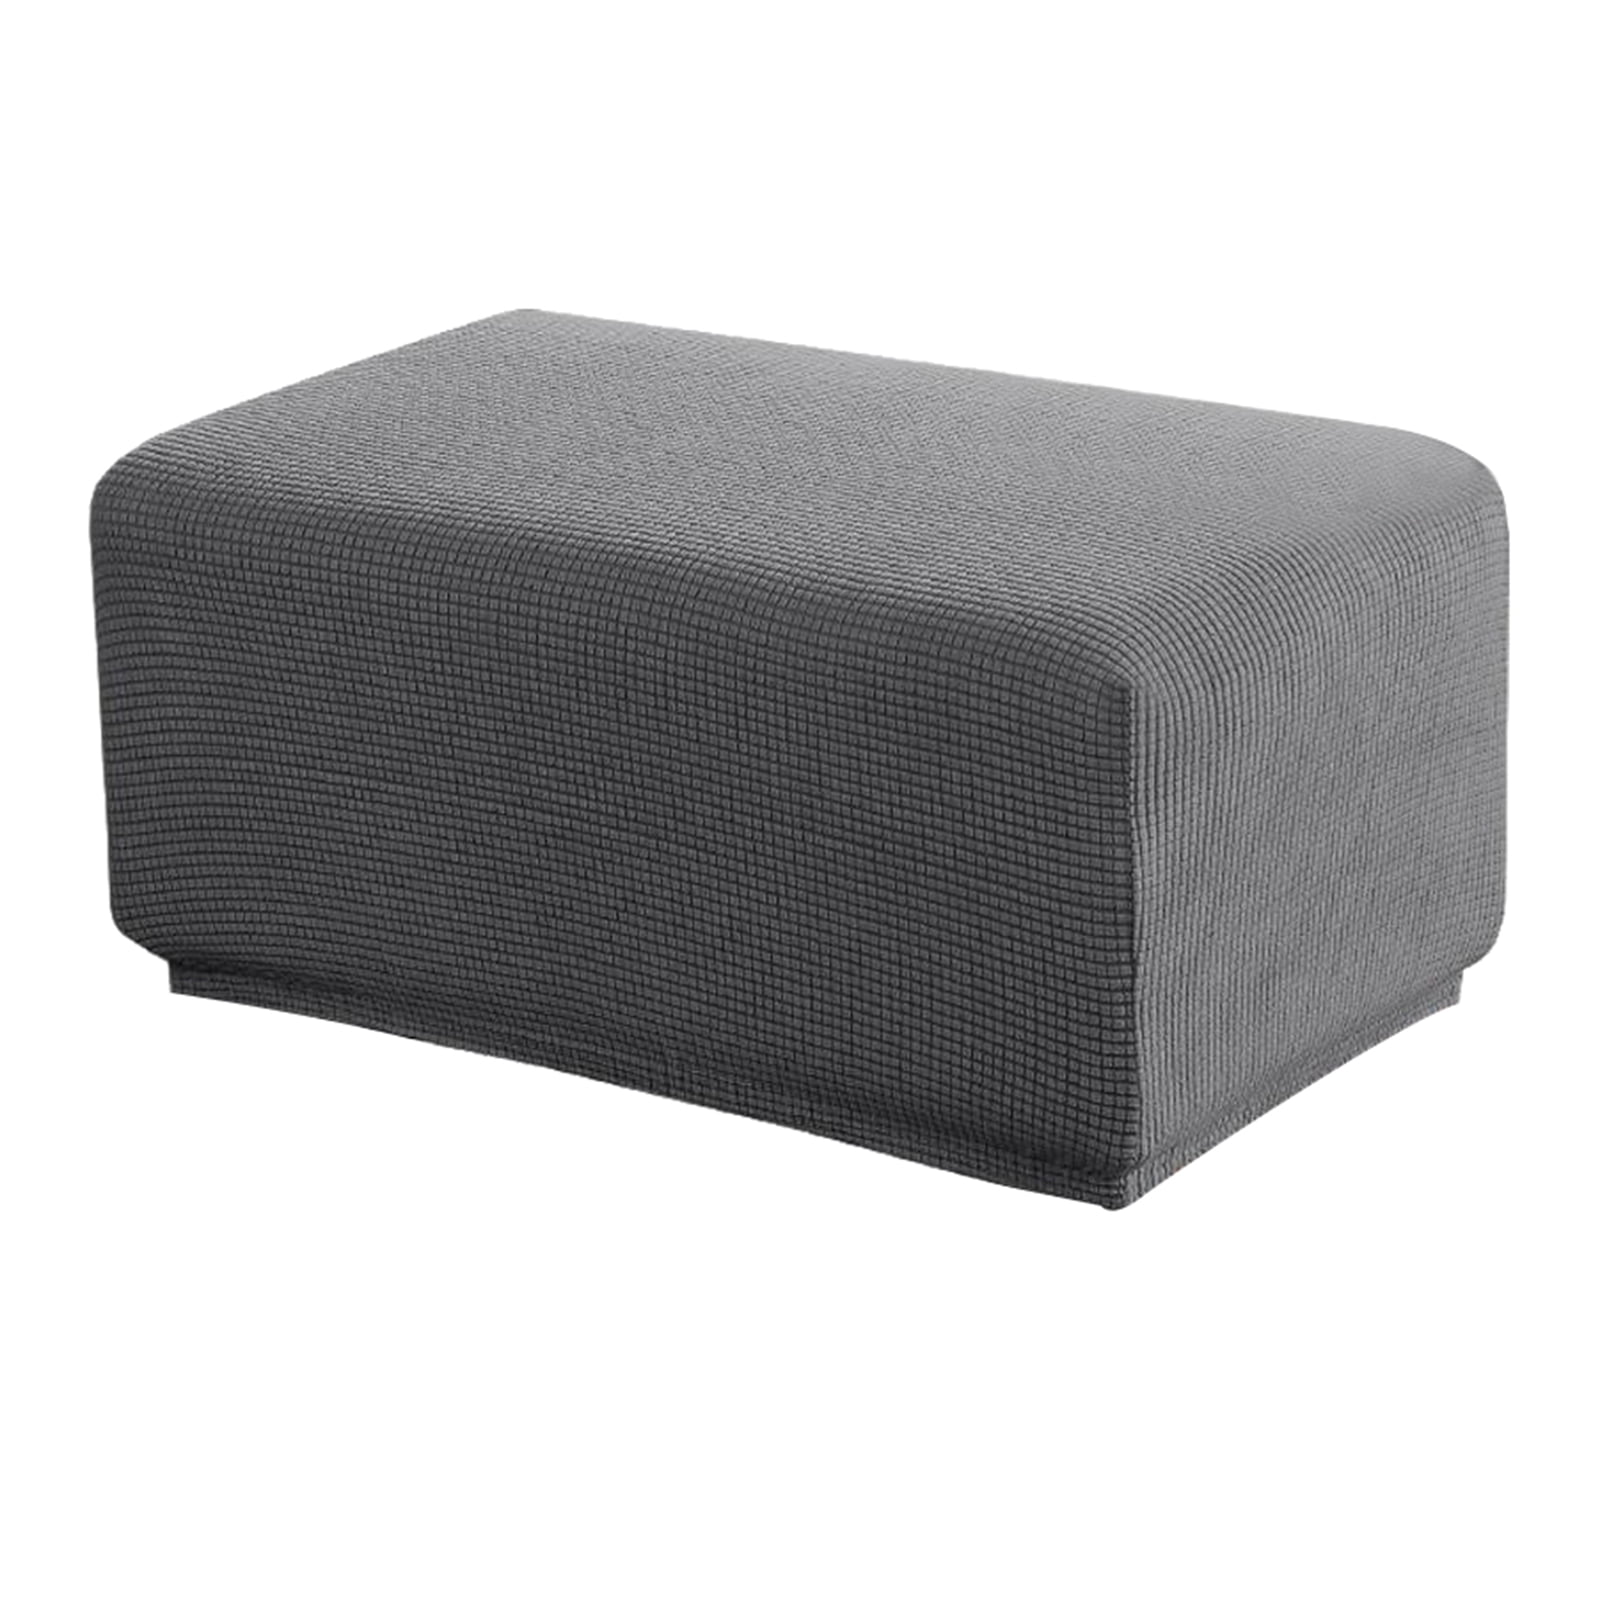 Small Ottoman Pouf Cover Stretch Fabric Footstool Sofa Seat Slipcover ~Gray 